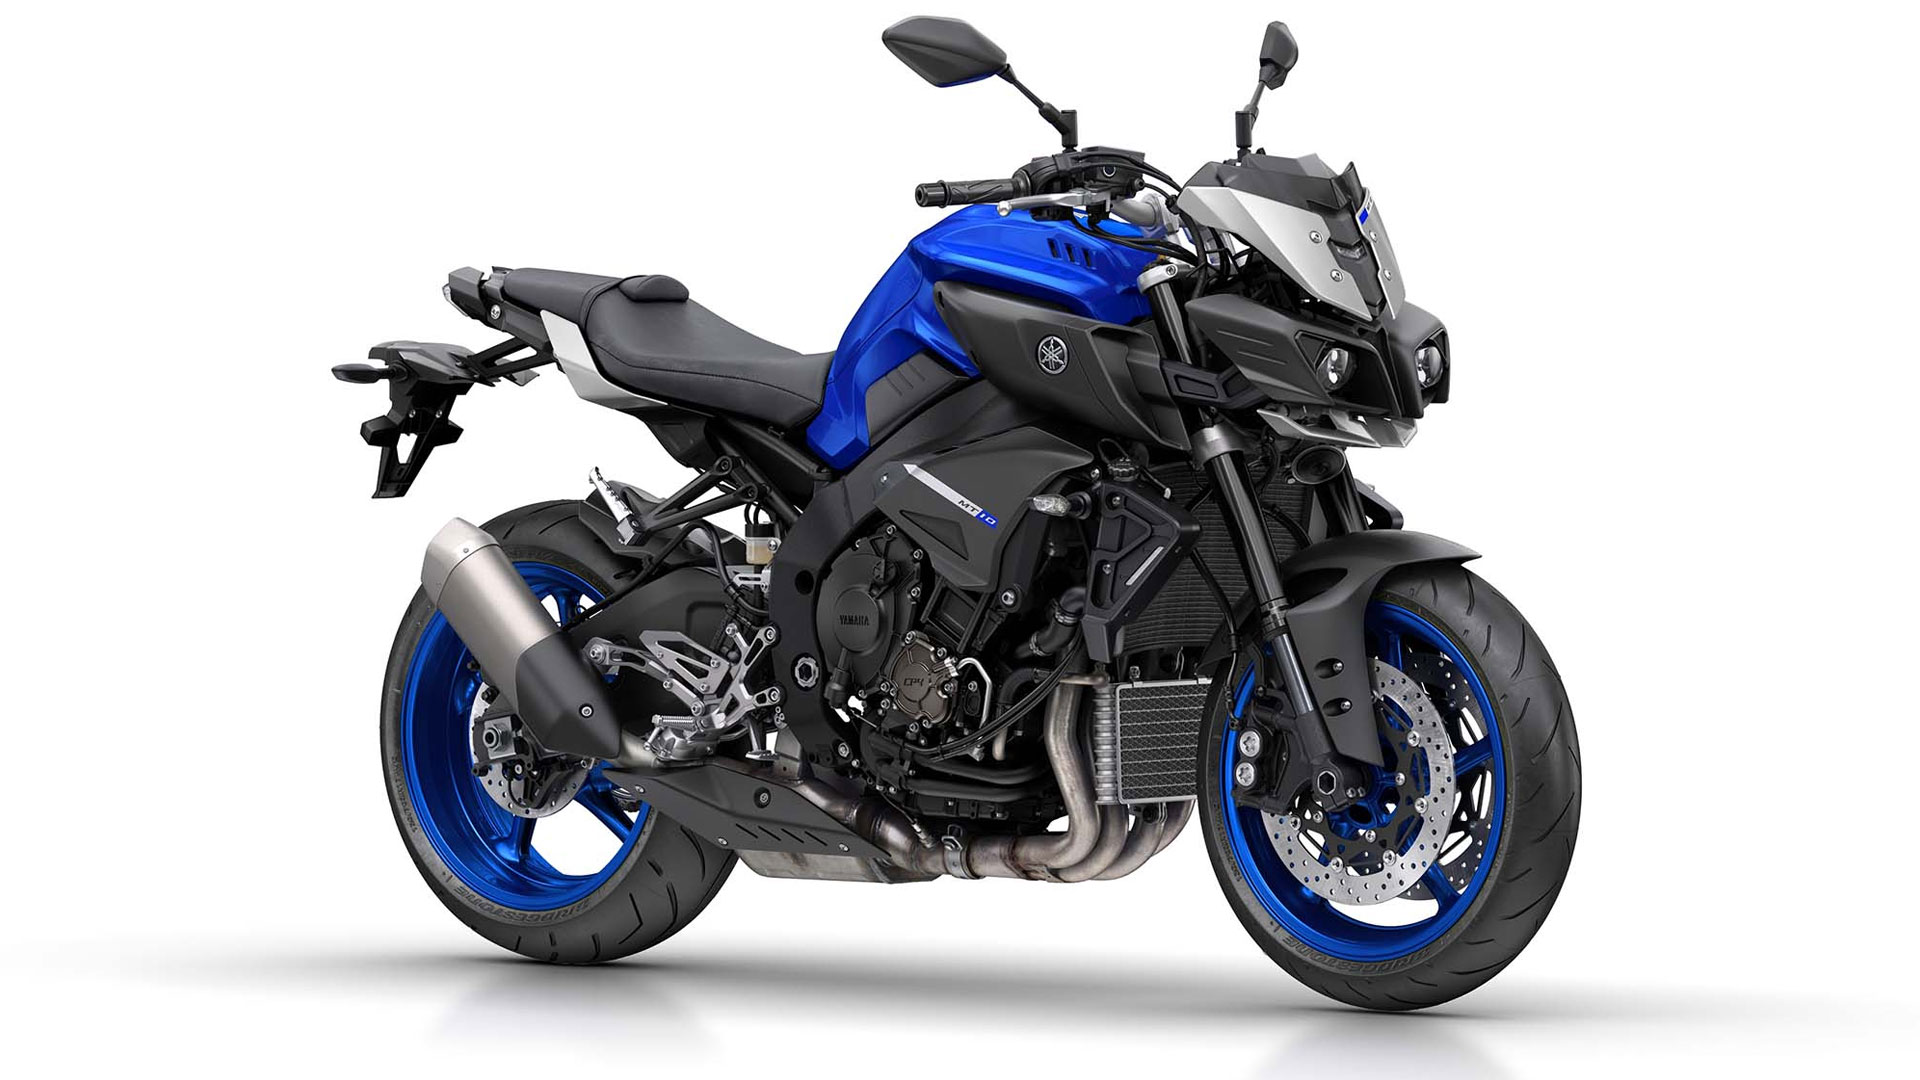 Yamaha MT-10 2018 - Price, Mileage, Reviews, Specification, Gallery